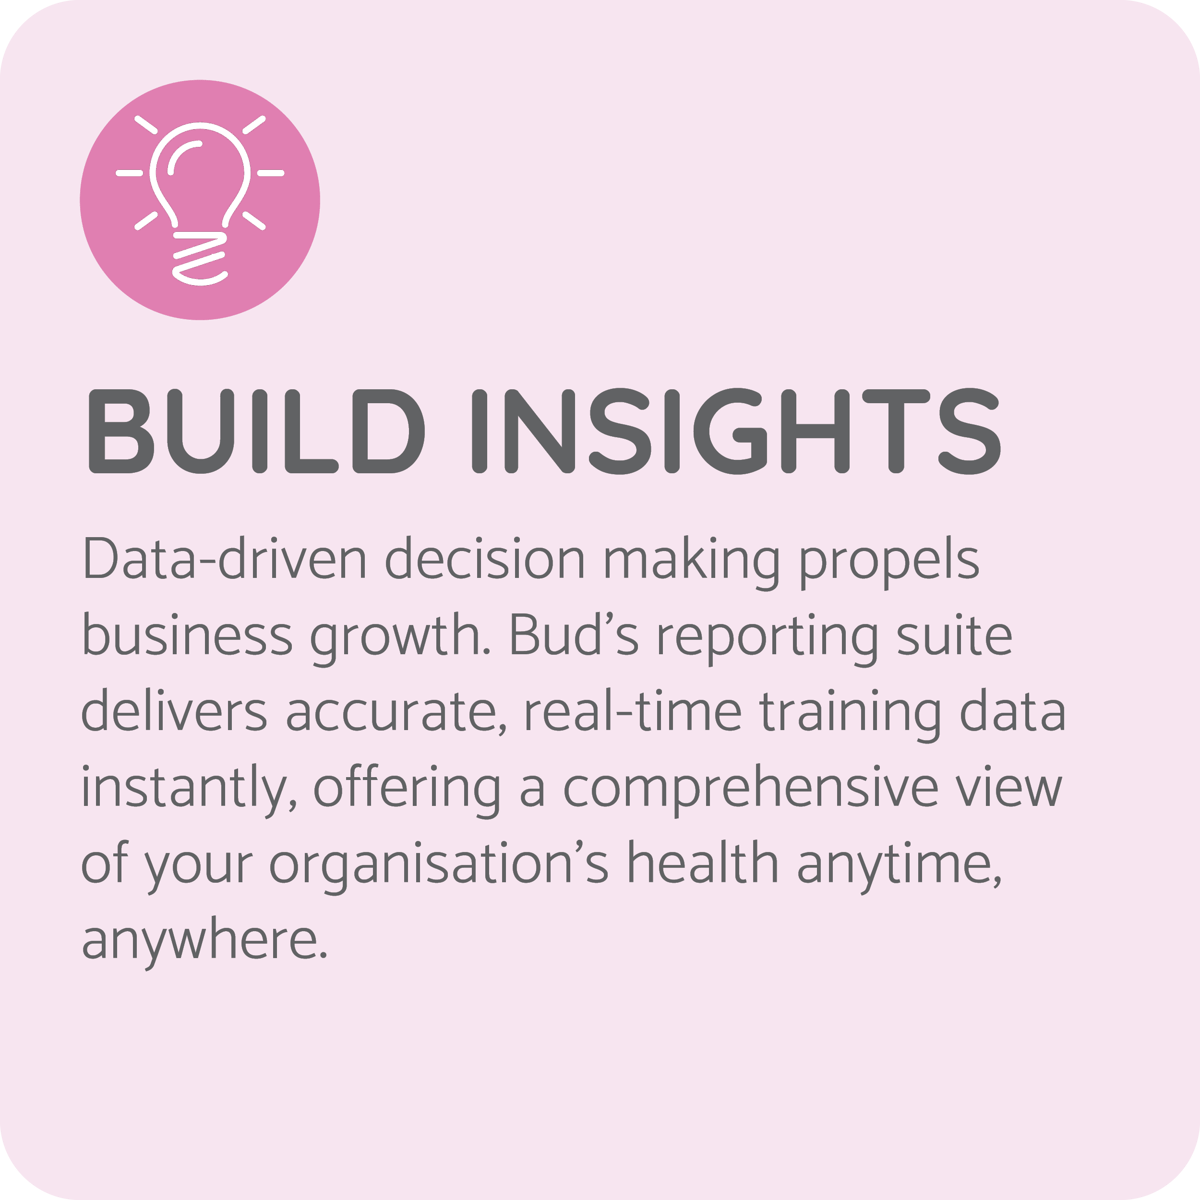 Build insights